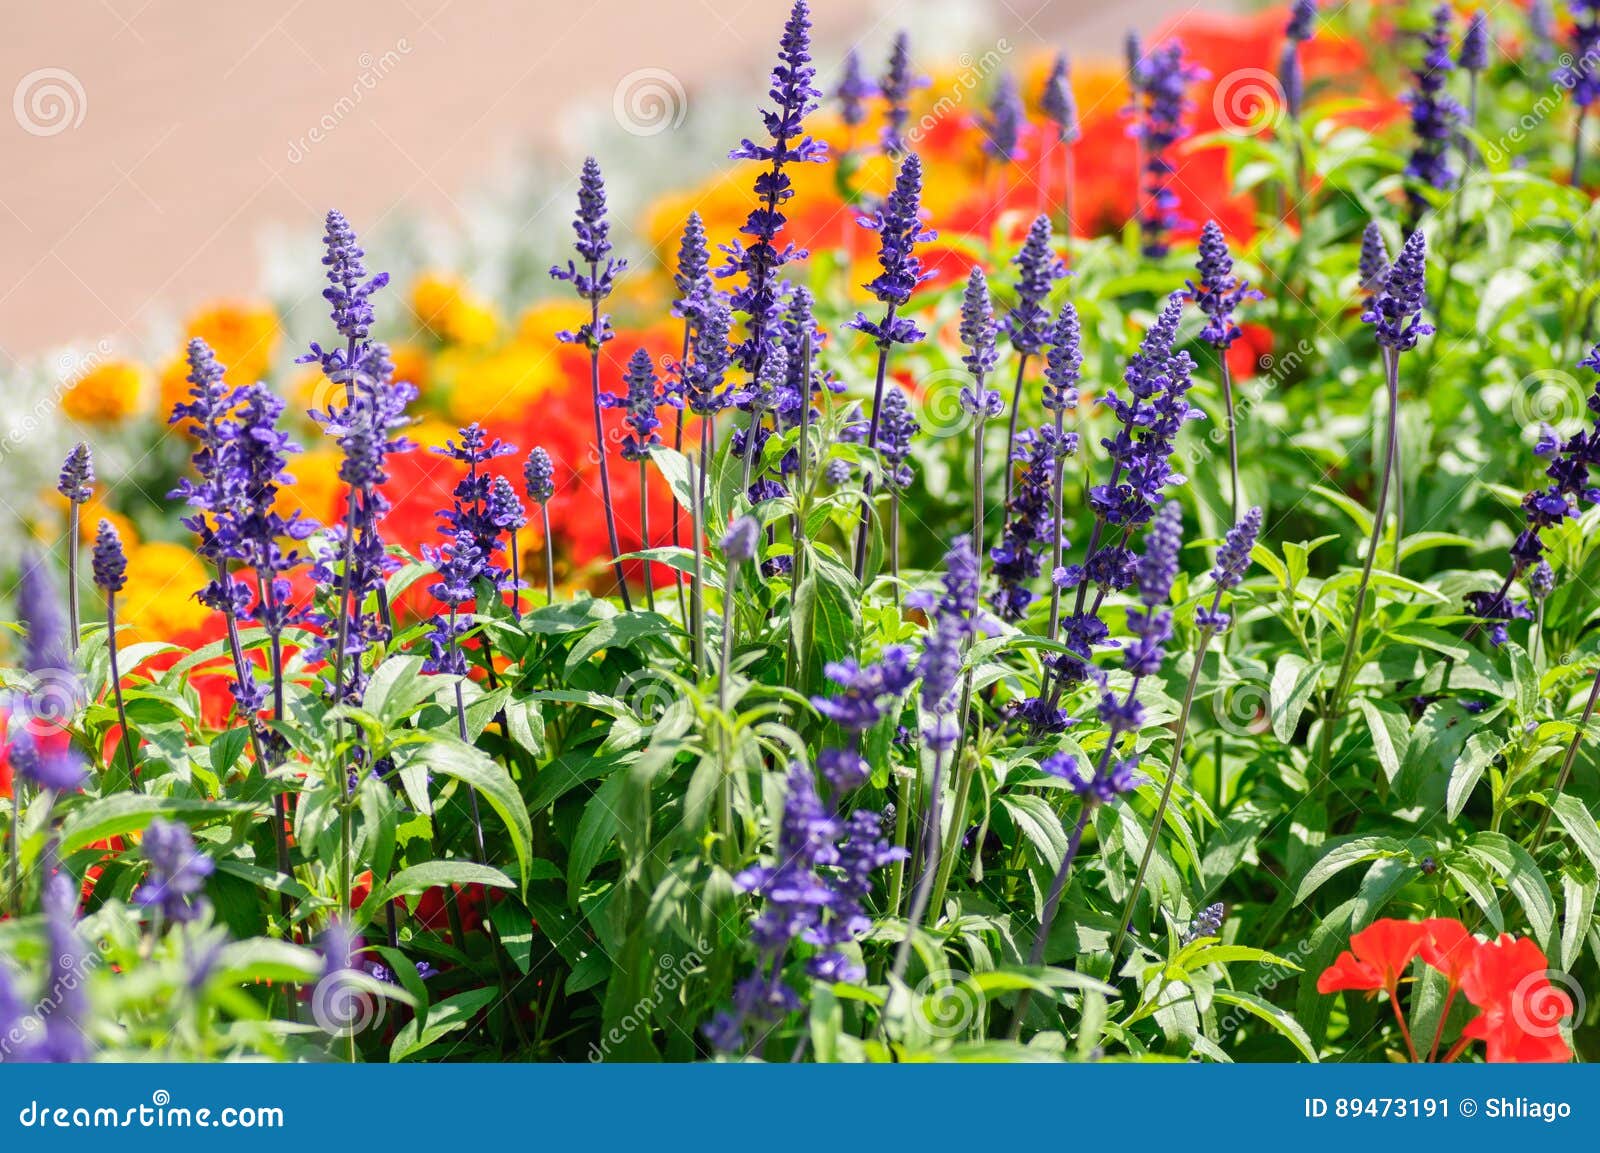 Different Colorful Beautiful Flowers on Flowerbed Stock Image - Image ...